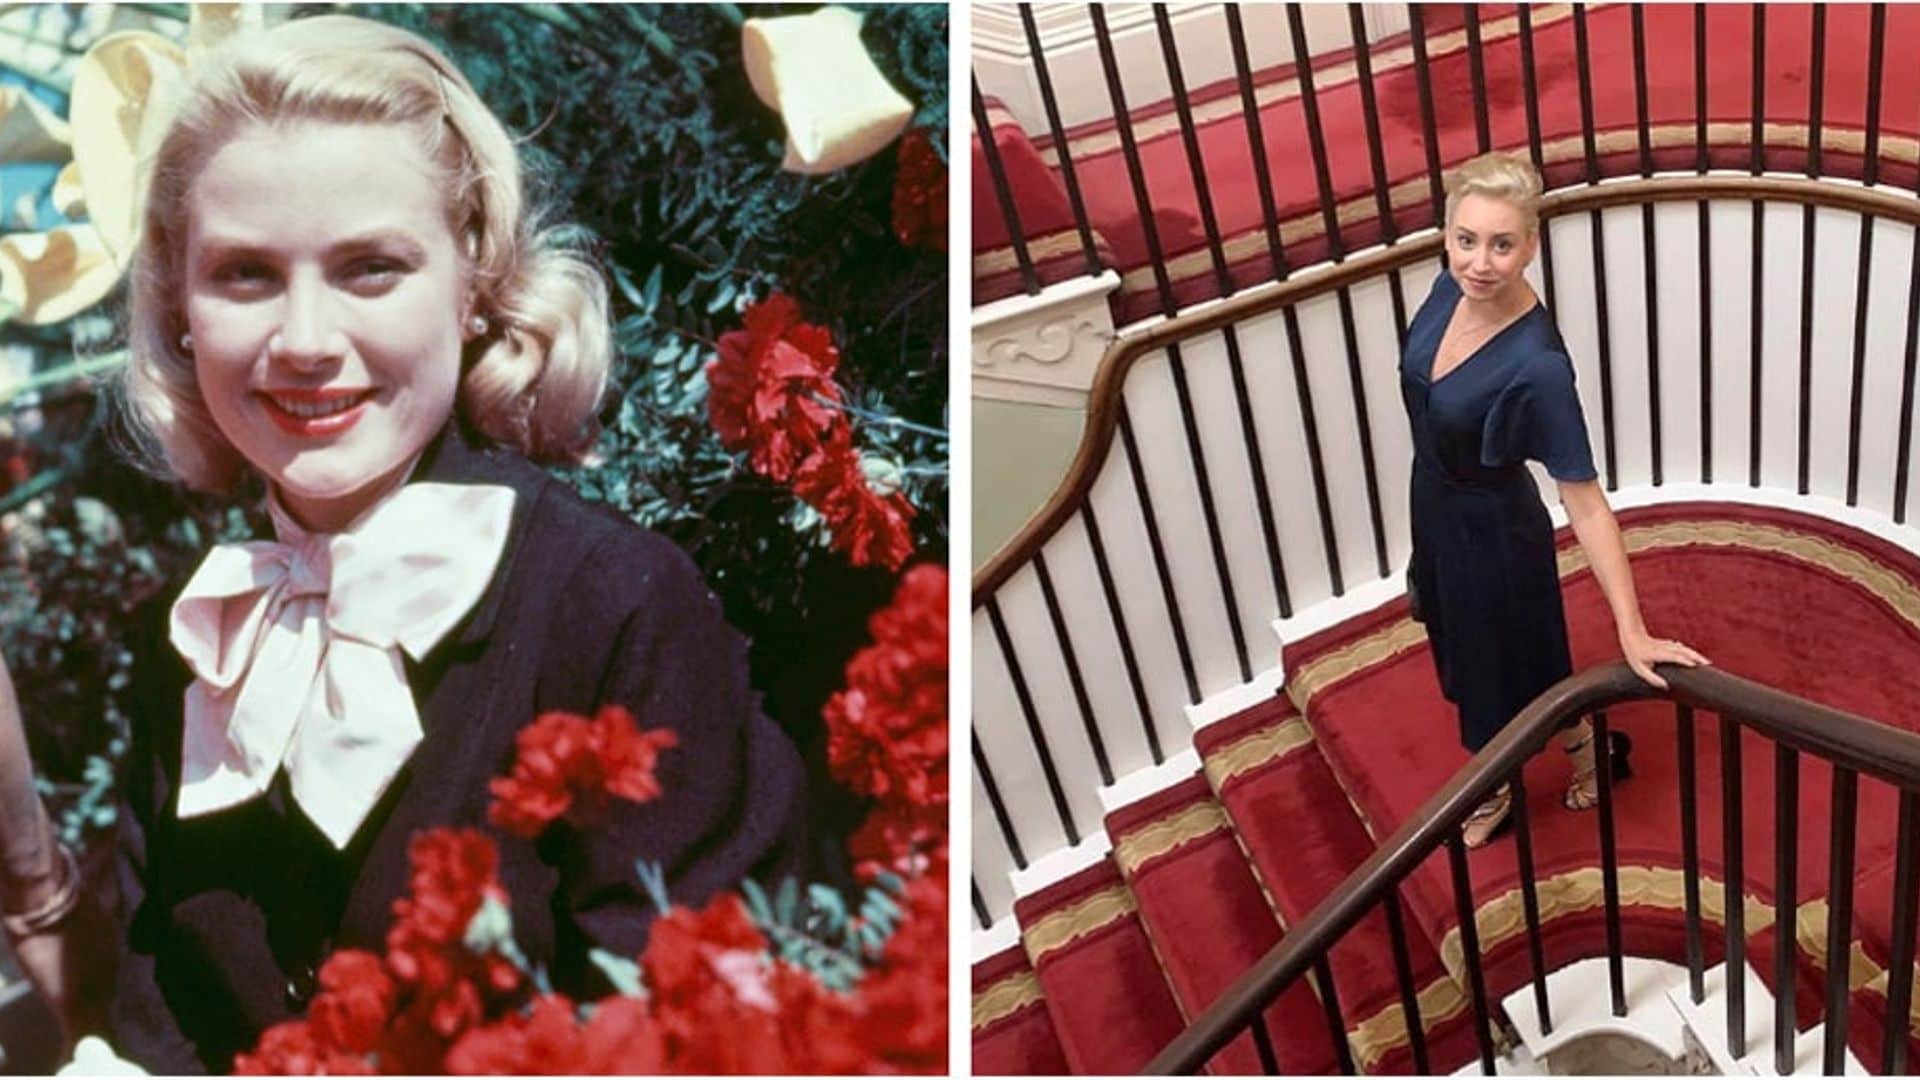 Grace Kelly's granddaughter traces her footsteps with special trip: 'I can feel her spirit'